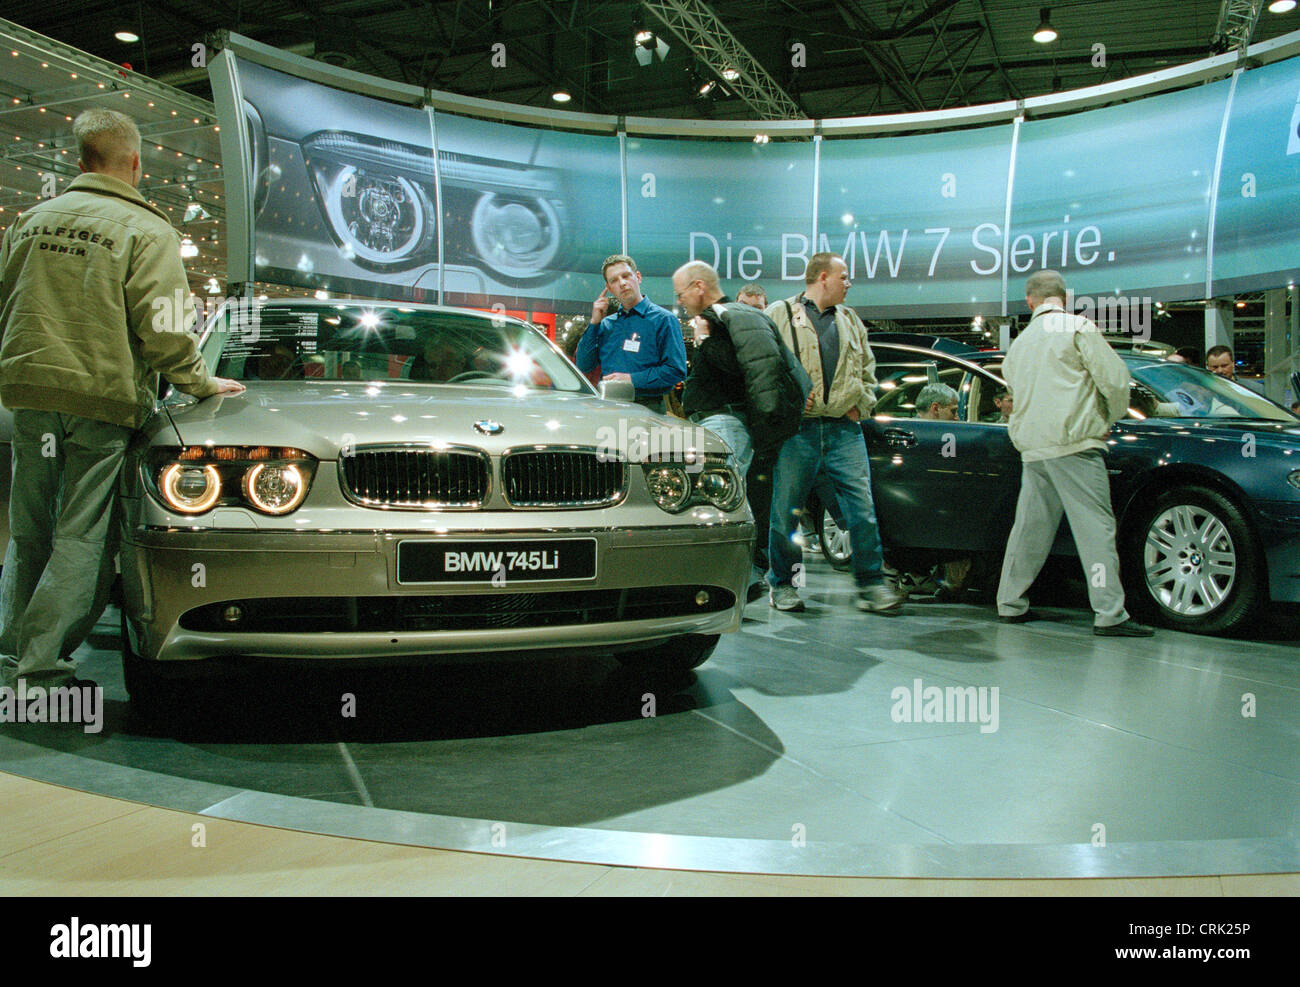 BMW presents its vehicles at the fair Auto Mobil International Stock Photo